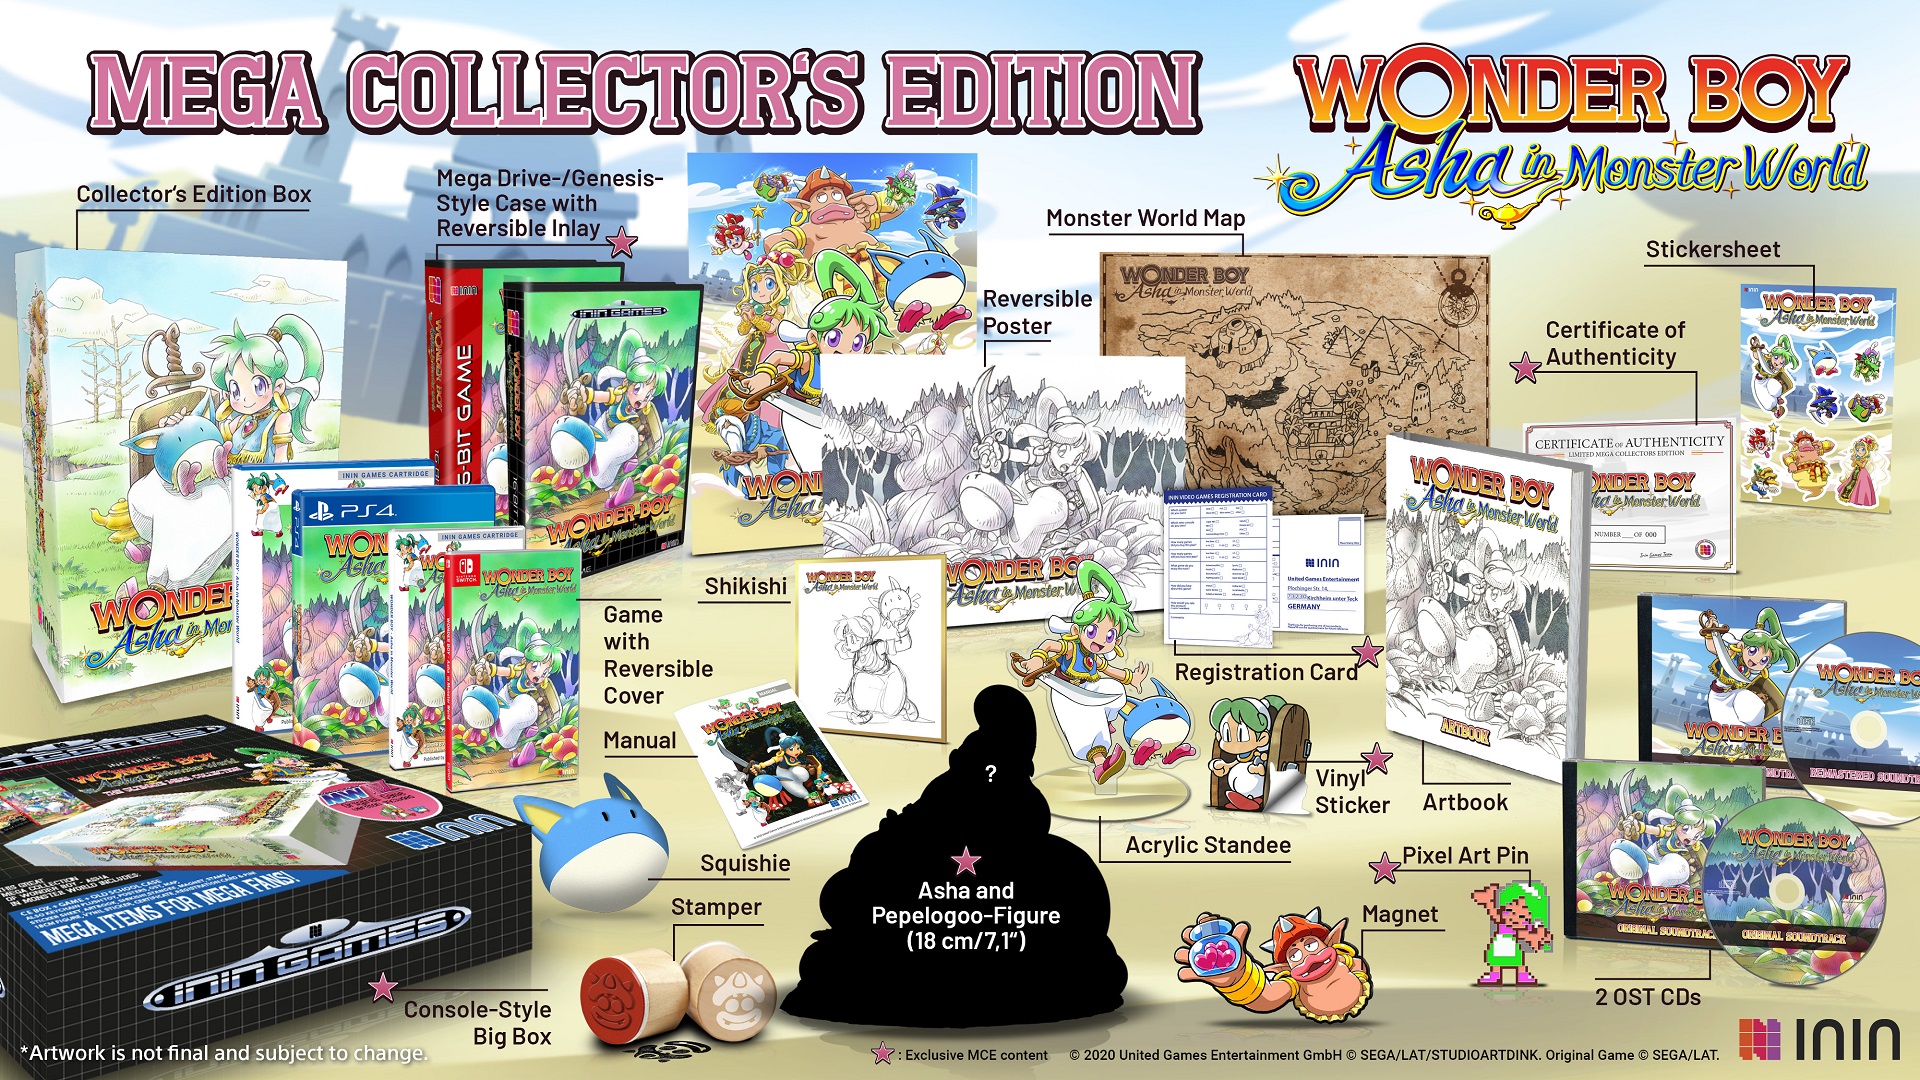 Wonder Boy: Asha in Monster World Limited Collector’s Editions Announced